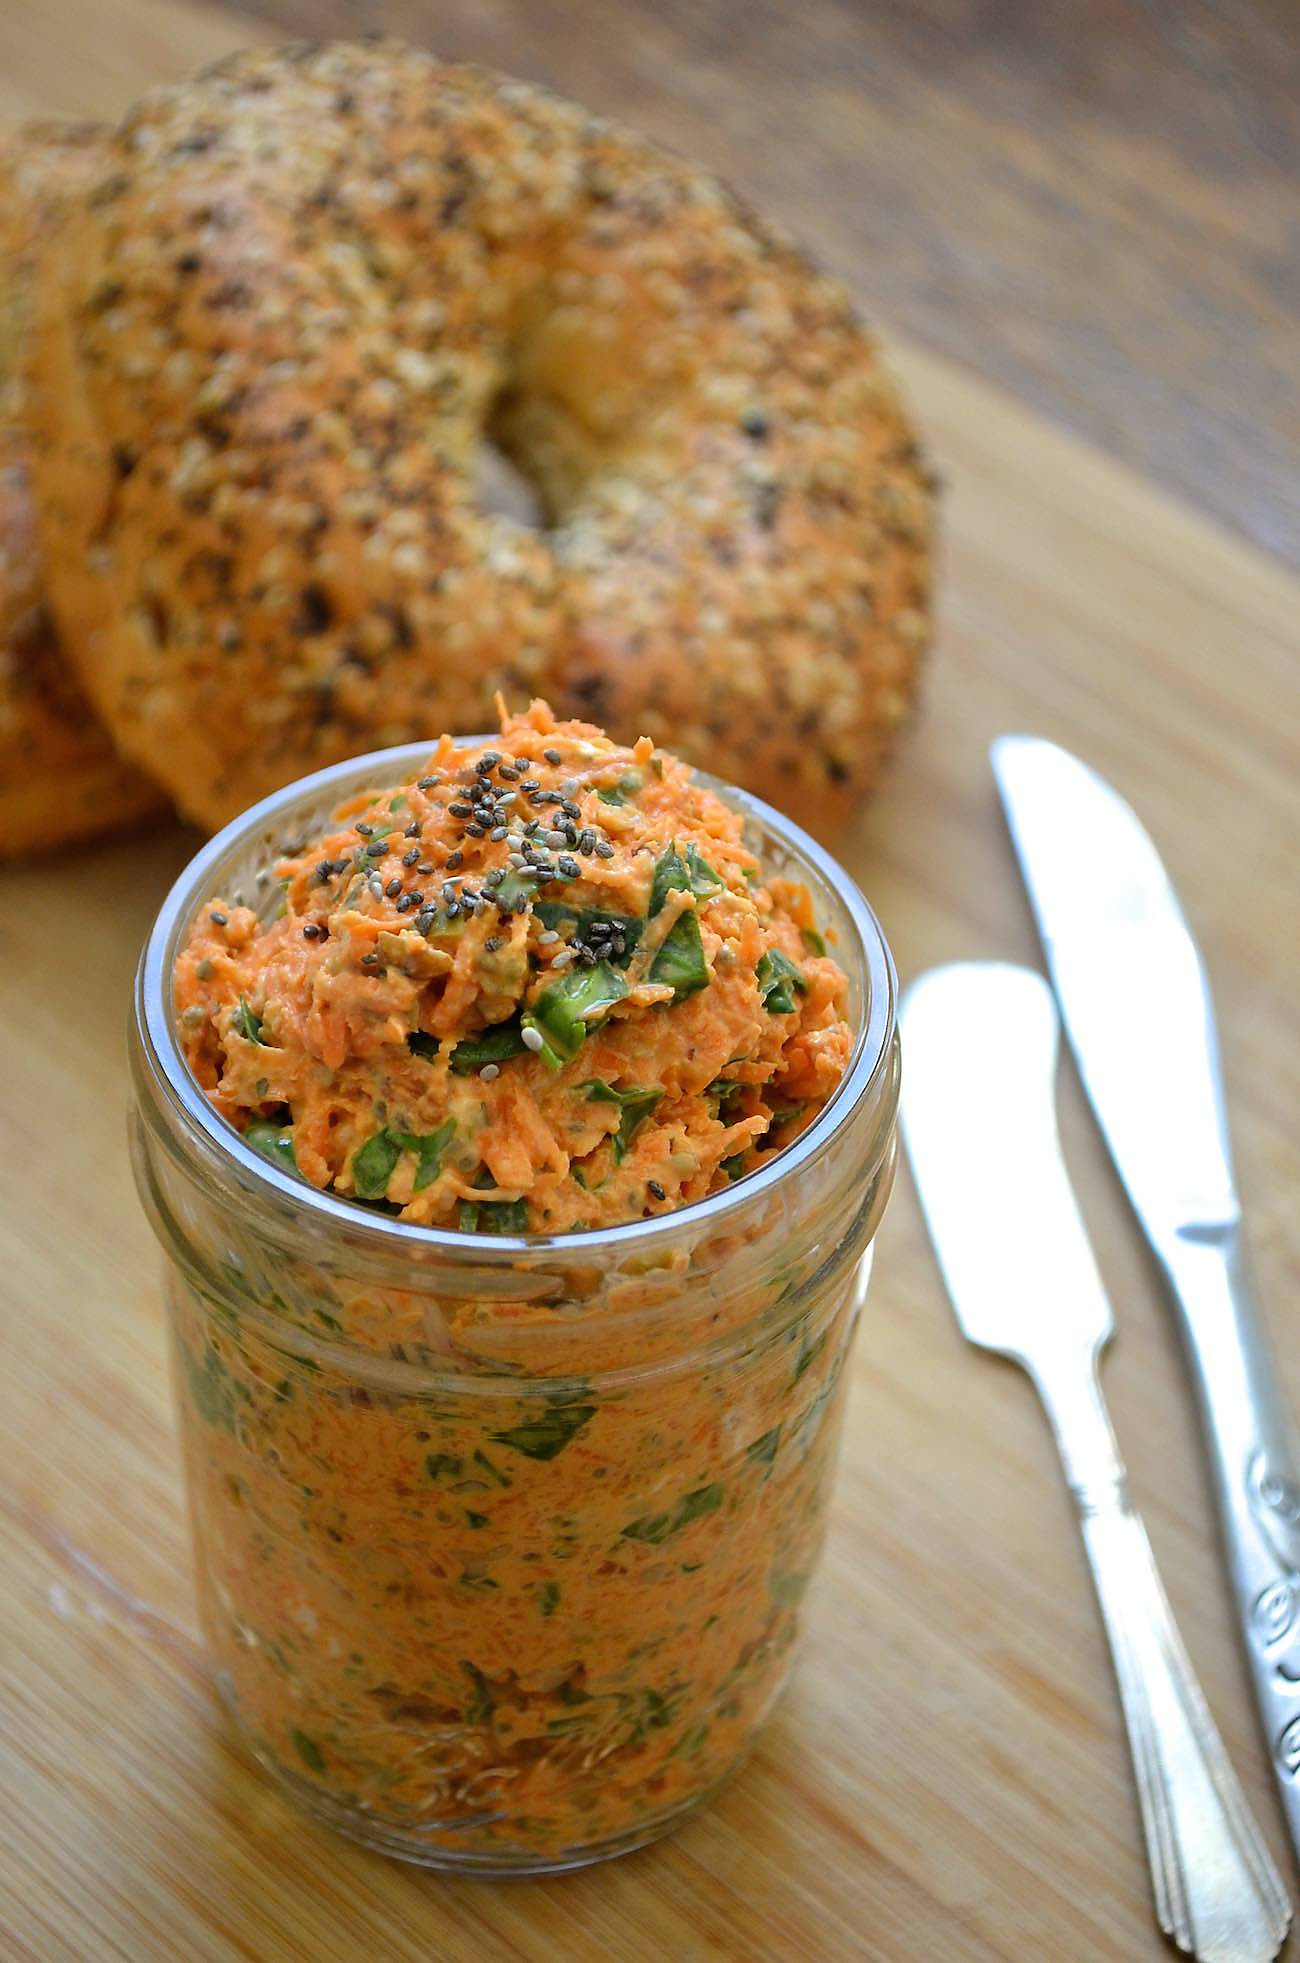 Savory Carrot Olive Spinach Sandwich Spread Recipe